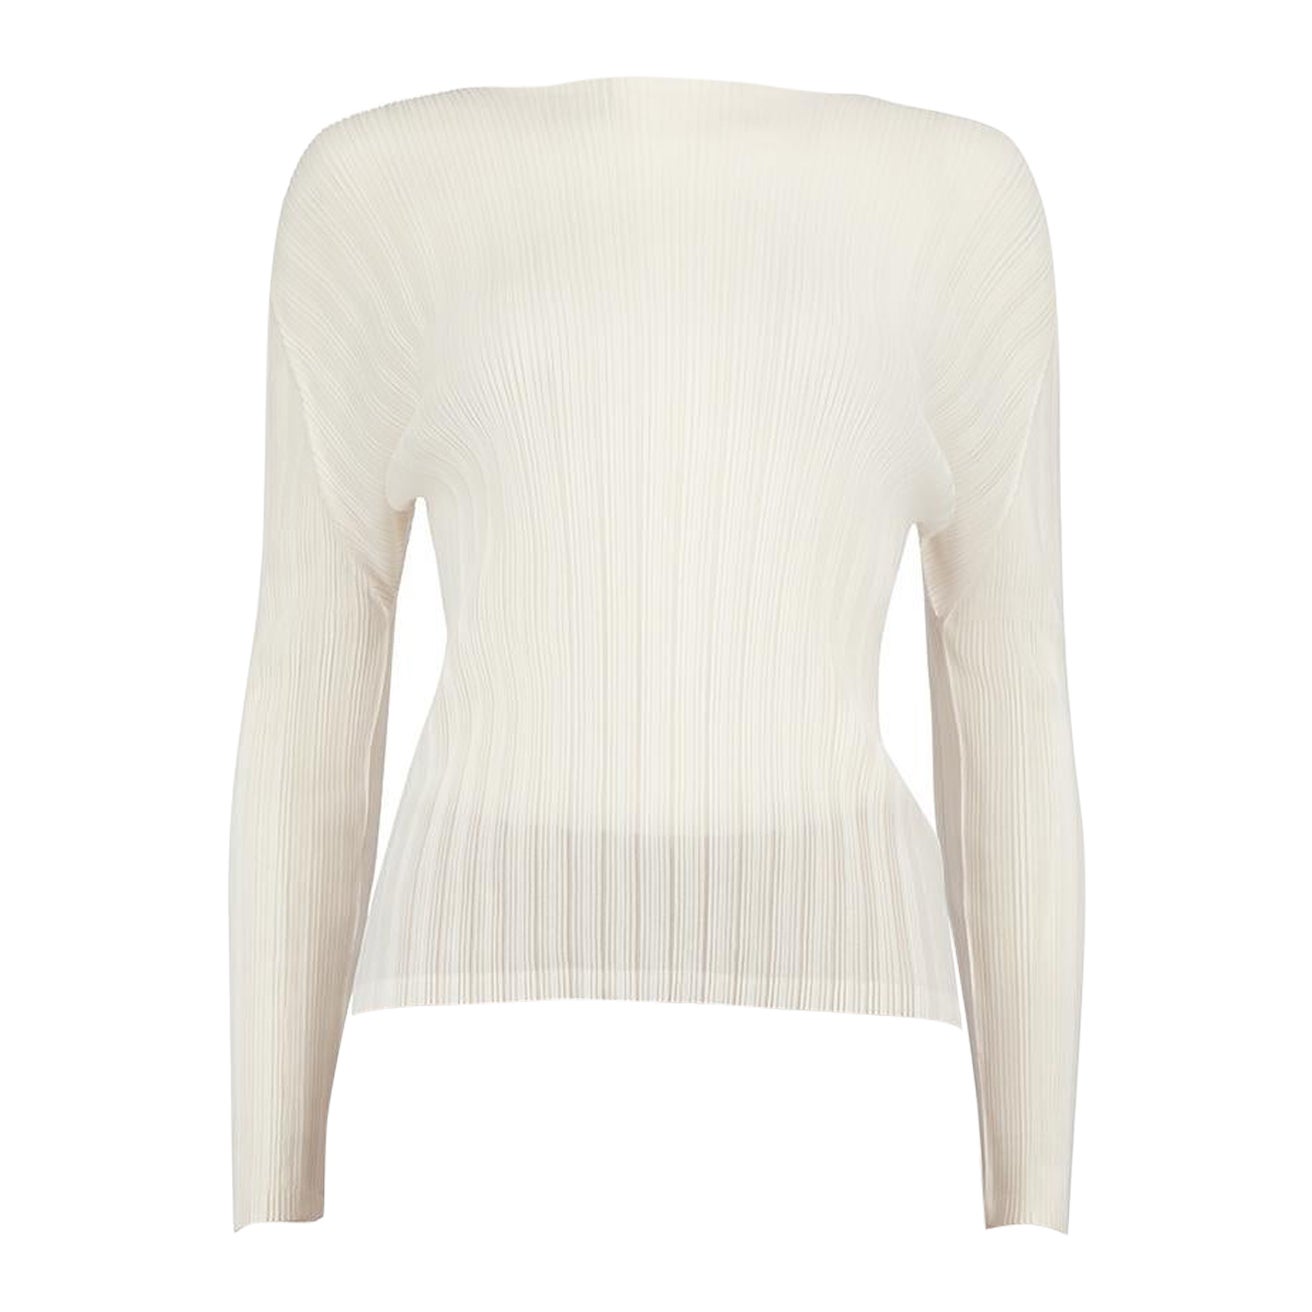 Issey Miyake Pleats Please Cream Round Neck Pleated Top Size M For Sale